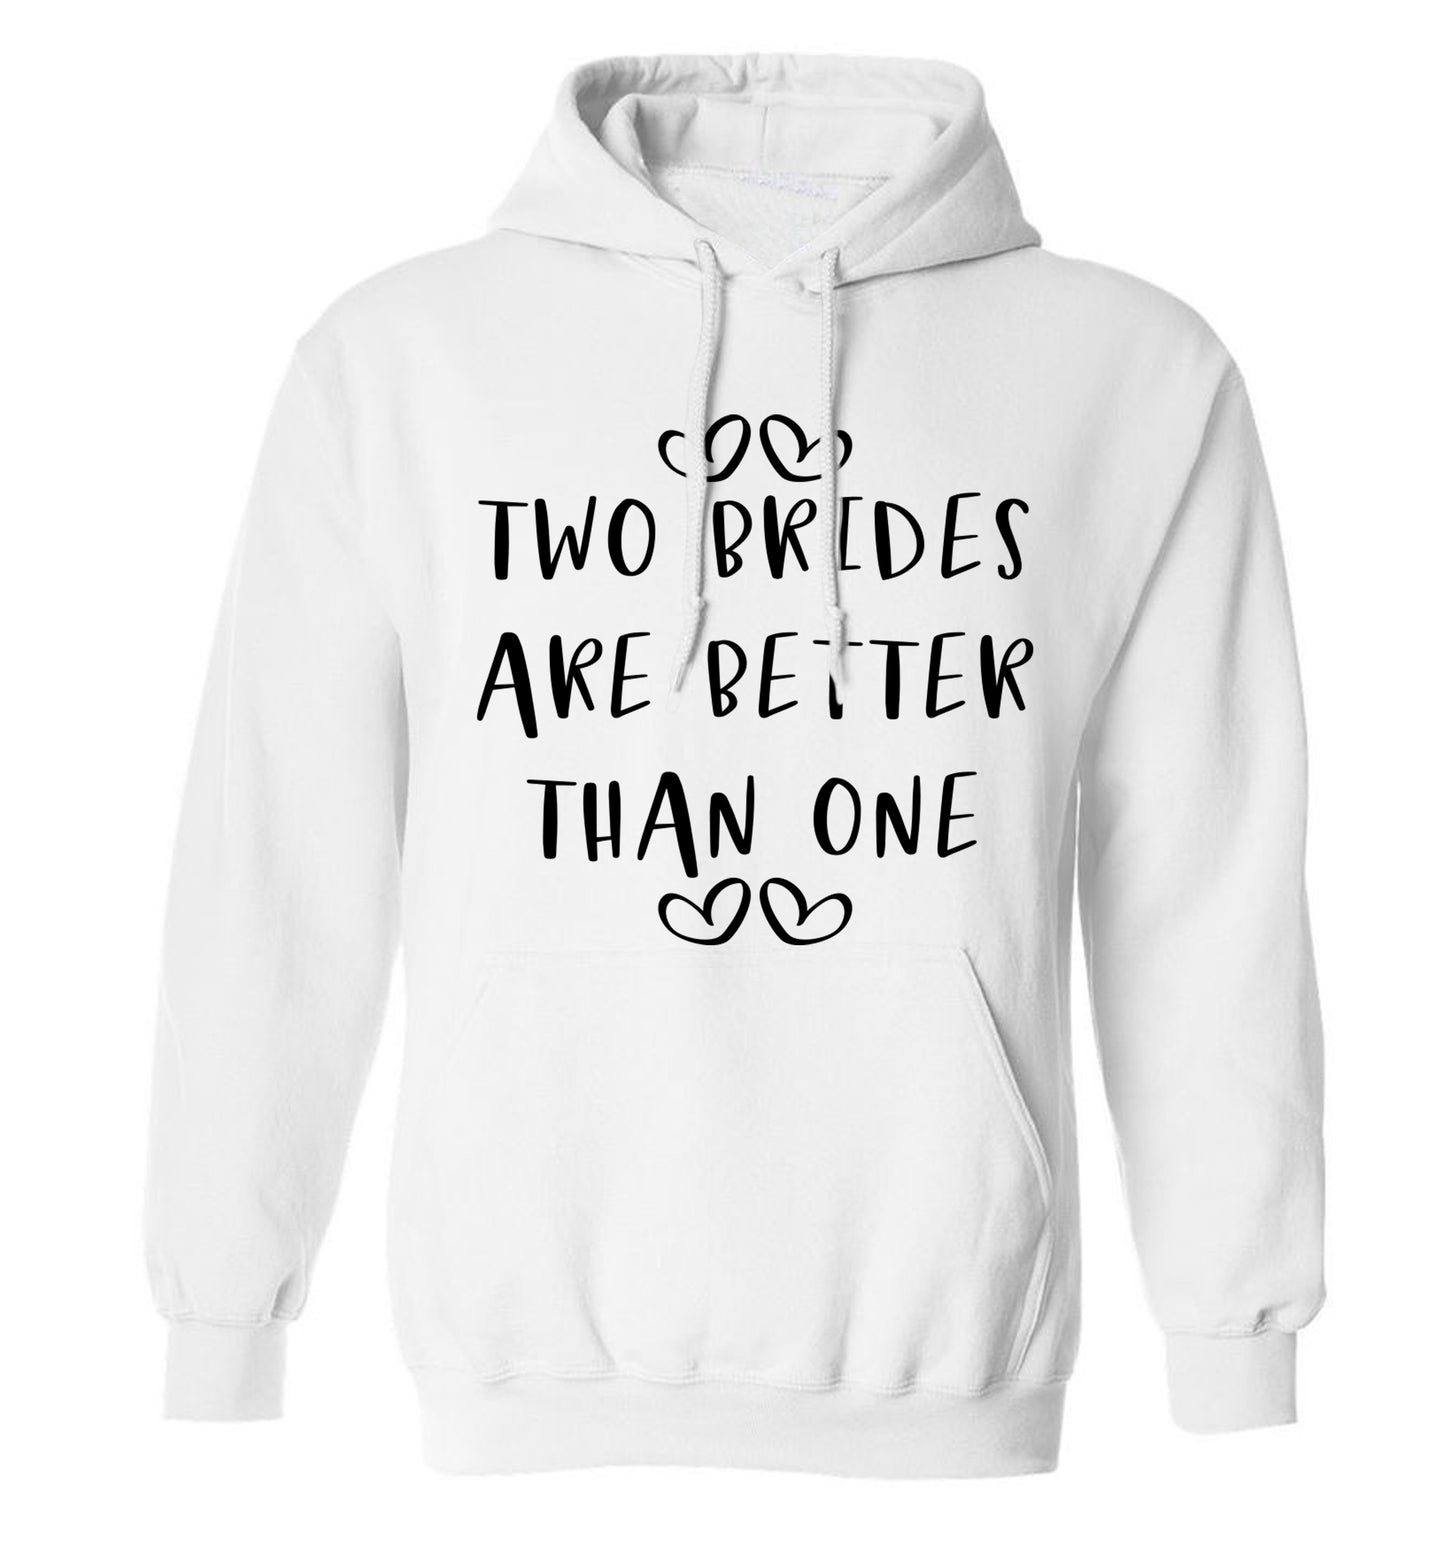 Two brides are better than one adults unisex white hoodie 2XL